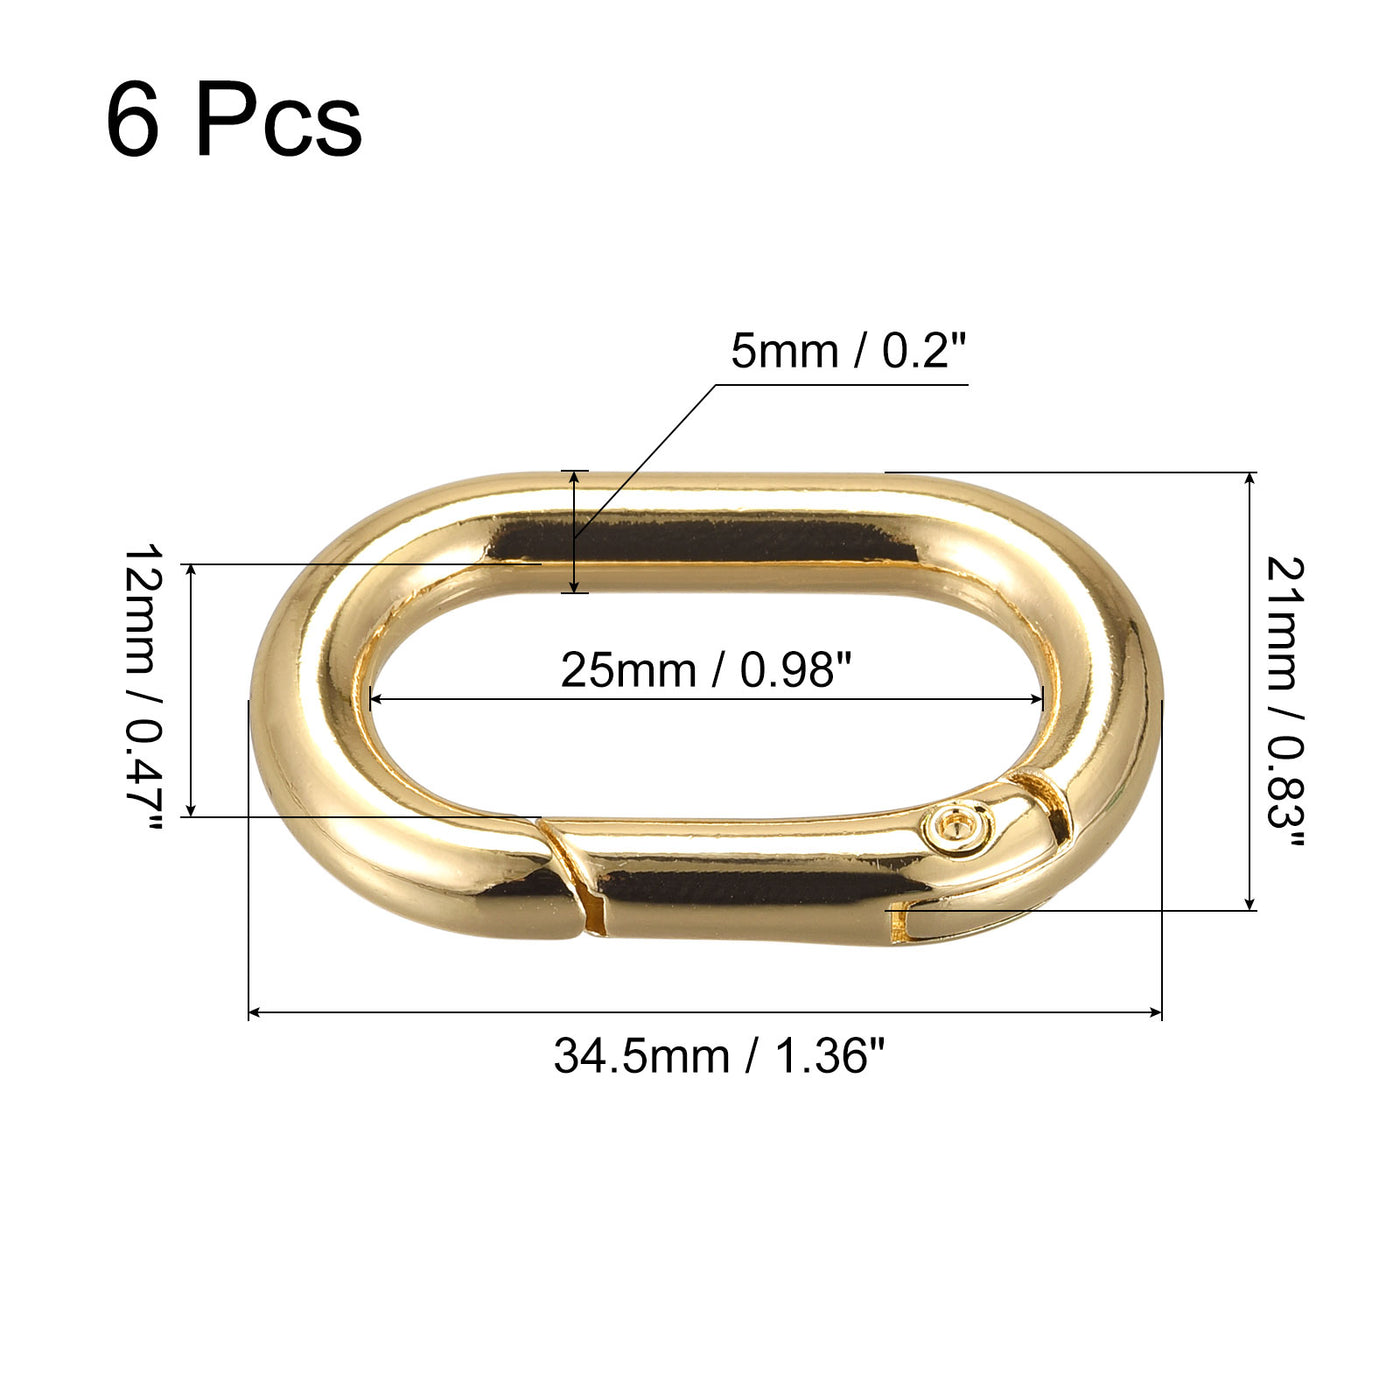 uxcell Uxcell 1.36" Spring Oval Ring Snap Clip Trigger for Bag Purse Keychain, 6Pcs Gold